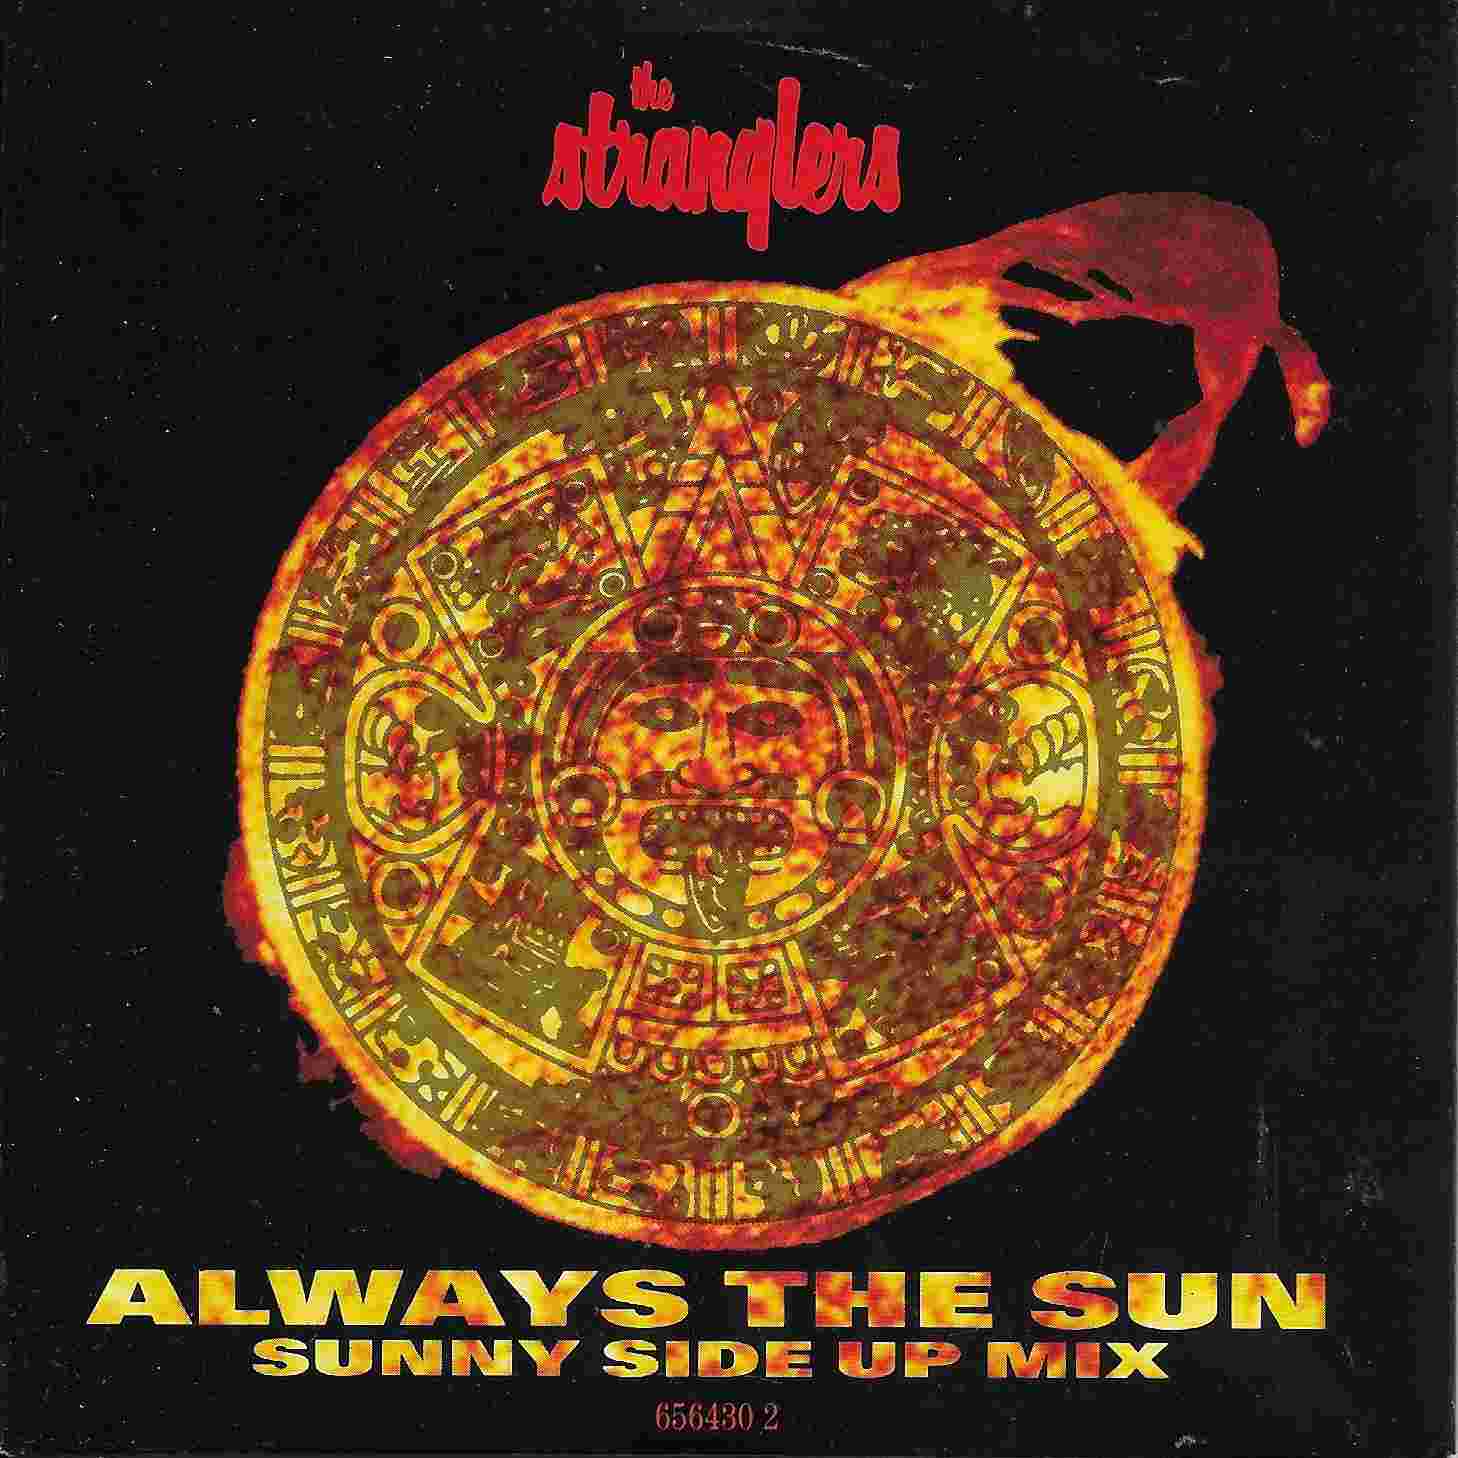 Picture of 656430 2 Always the Sun (Sunny side up mix) by artist The Stranglers